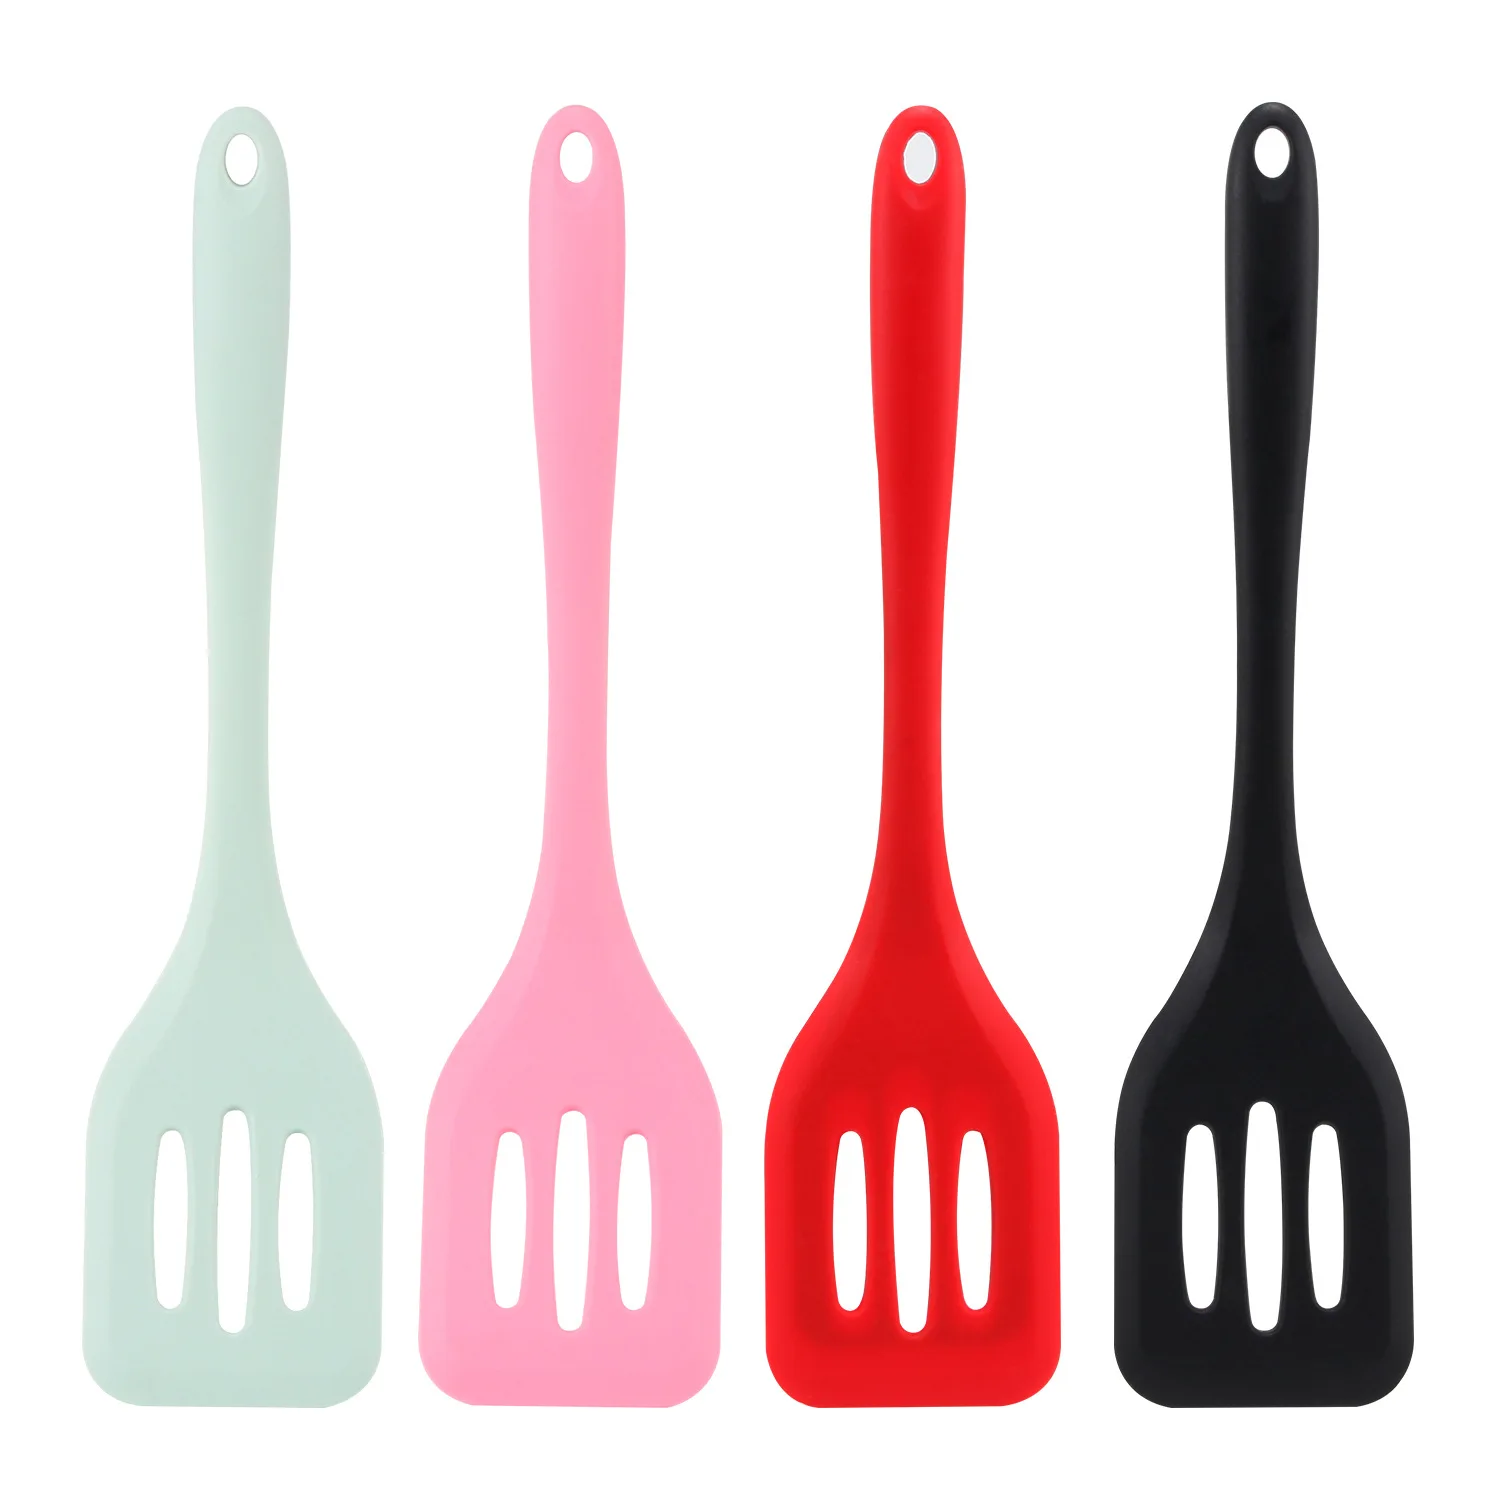 

Black Egg Fish Frying Pan Spatula Scoop Fried Shovel Silicone Turners Cooking Utensils Kitchen Tools Cooking Accessories Gadgets